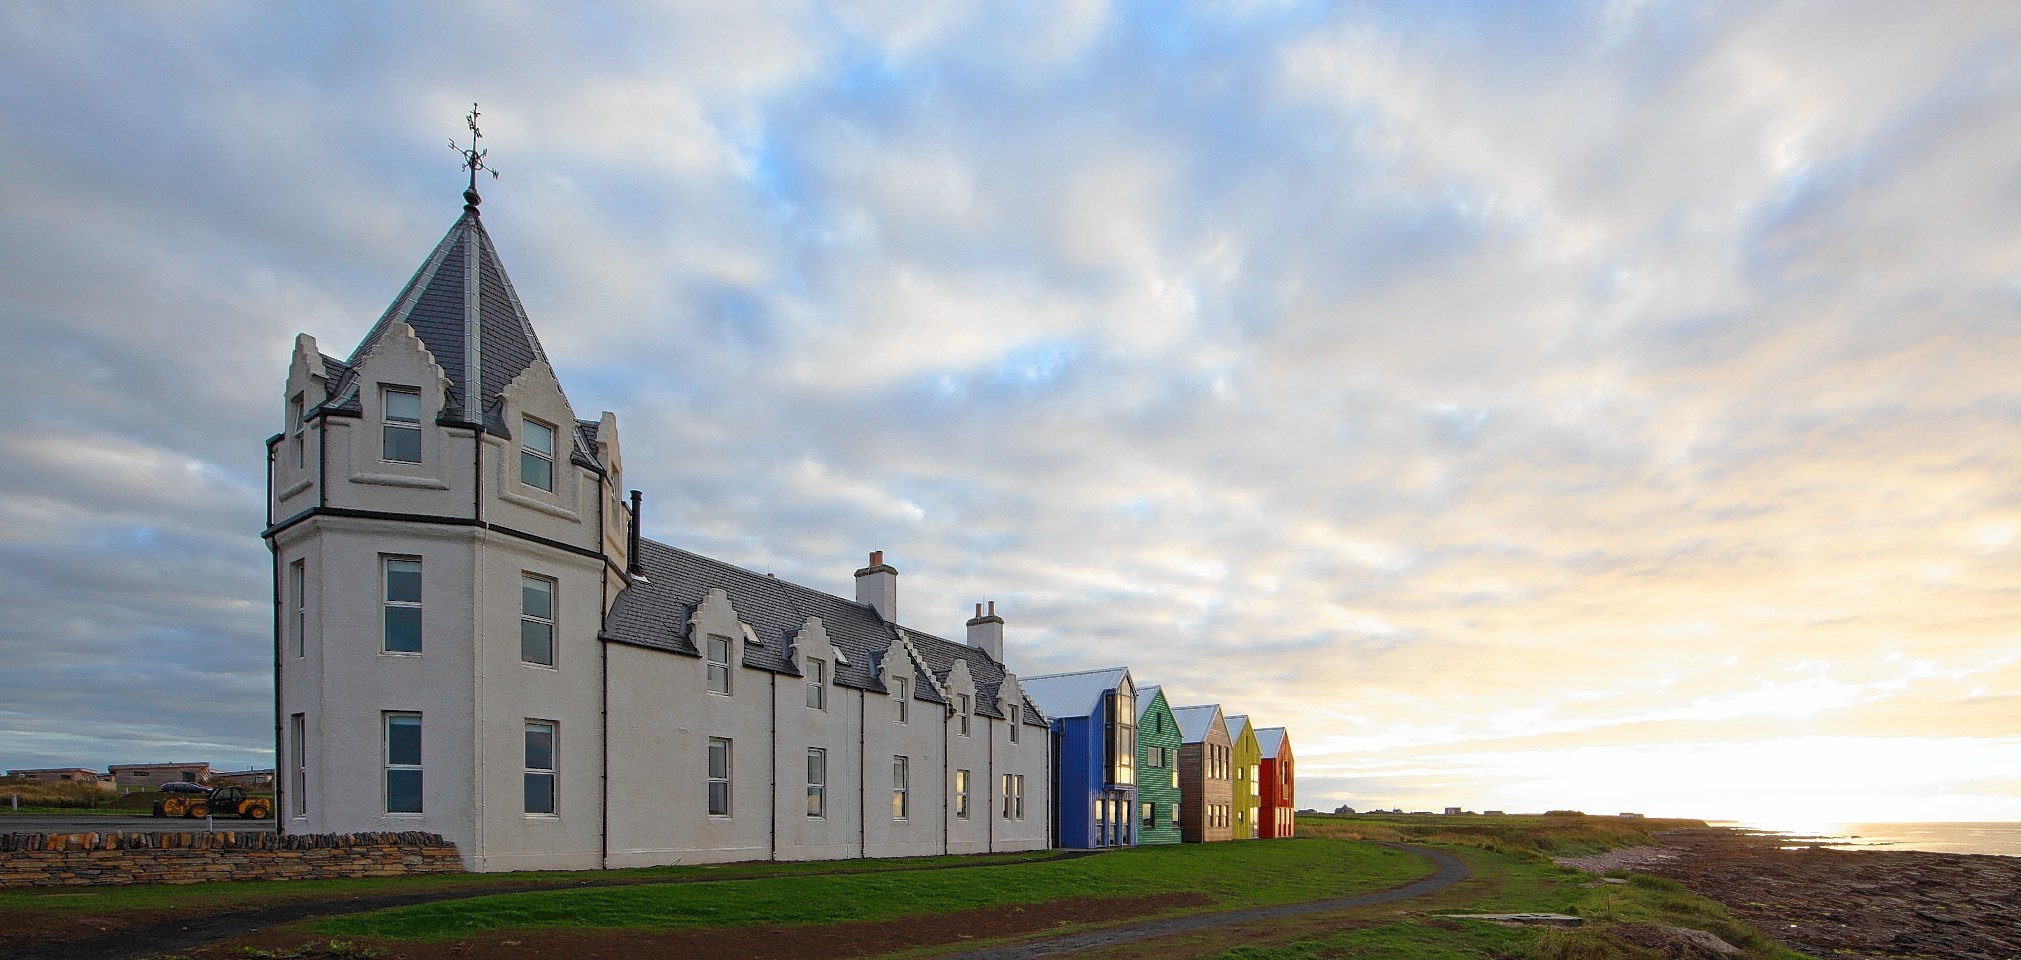 The plans for John O’Groats have been drawn up by Natural Retreats, which has already refurbished the John O’Groats Hotel.